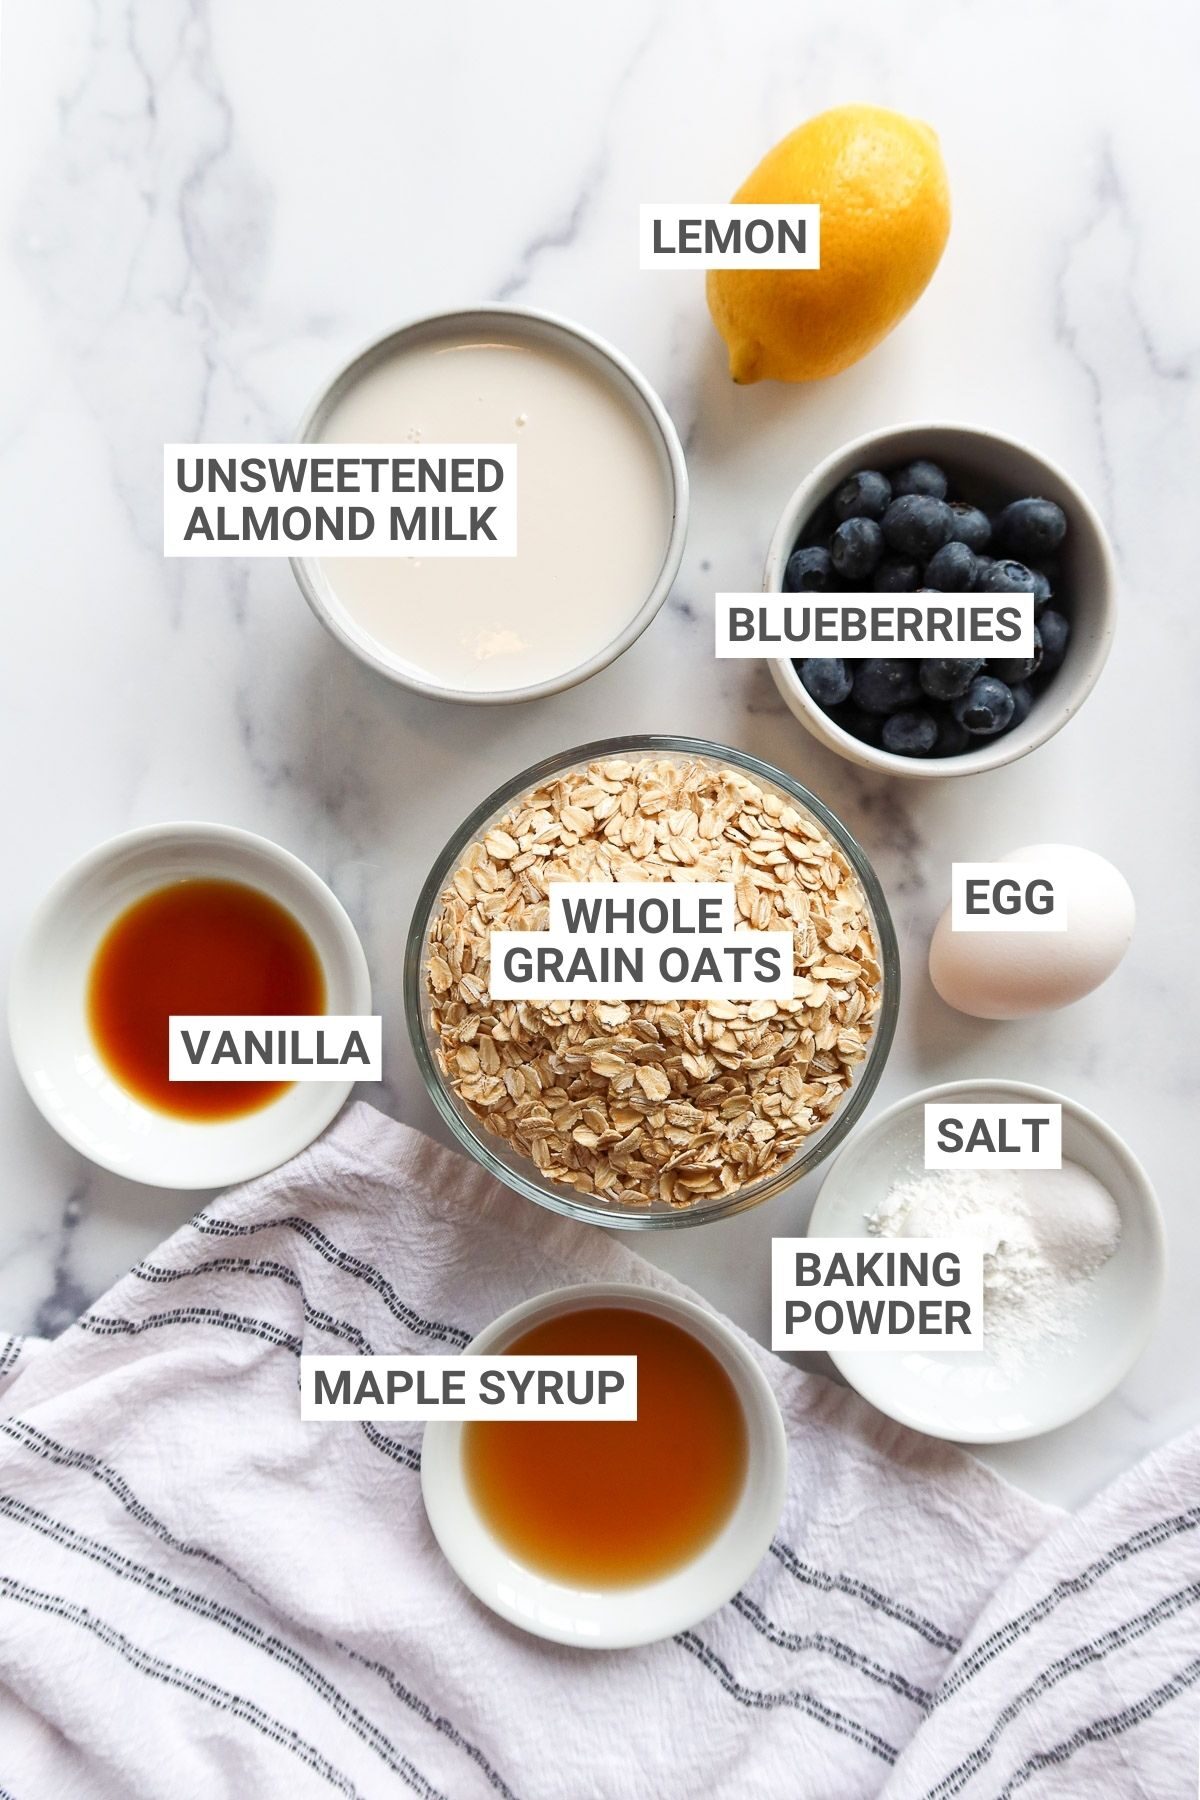 Ingredients for pancakes arranged on a countertop with text overlay labels.